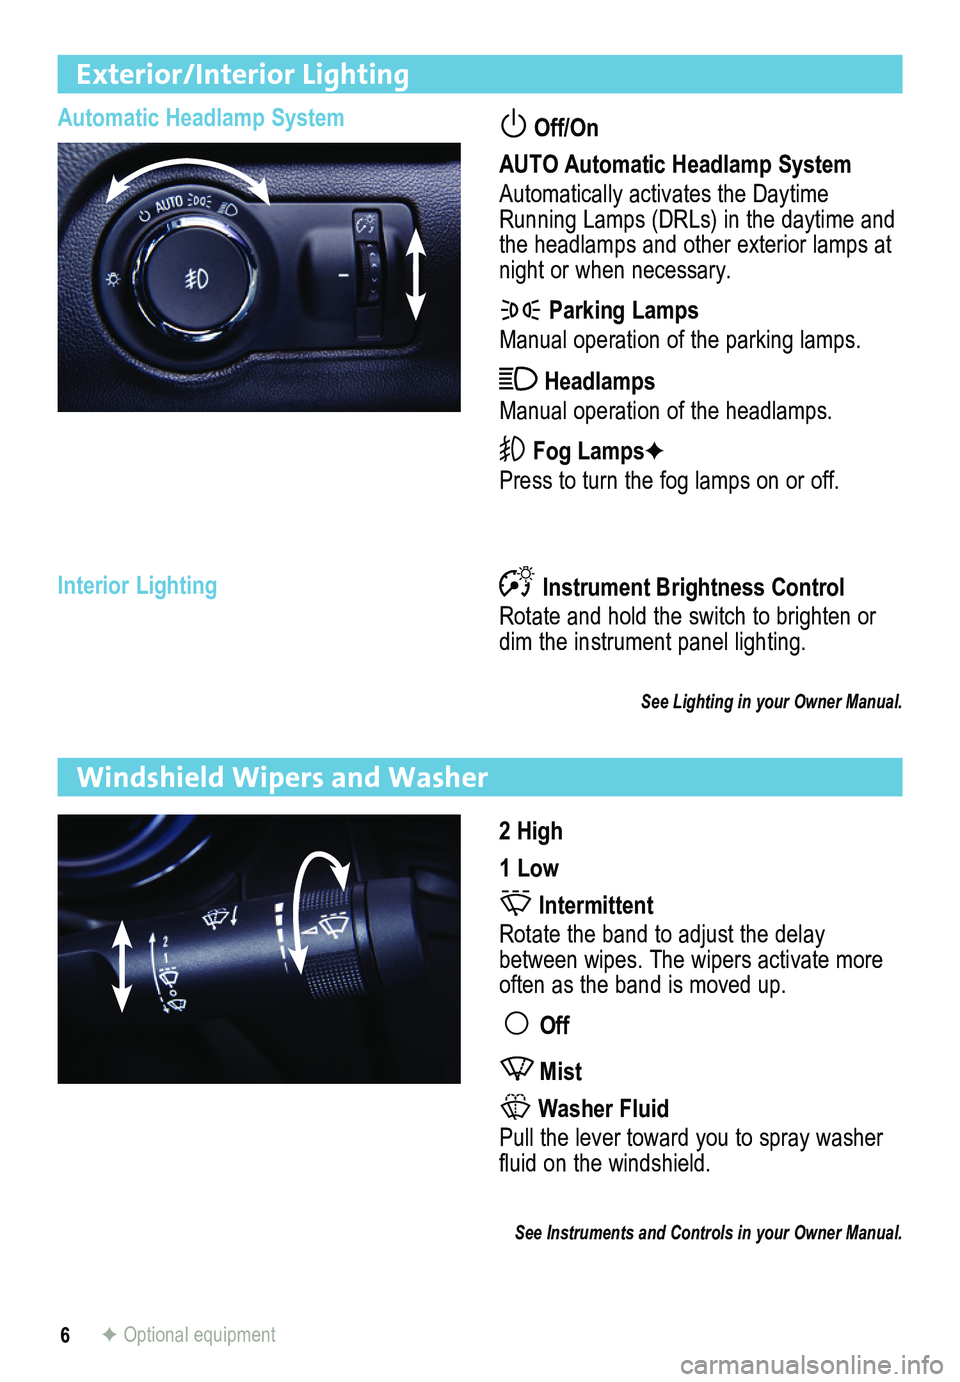 BUICK REGAL 2013  Get To Know Guide 6
Exterior/Interior Lighting
Automatic Headlamp System Off/On  
AUTO Automatic Headlamp System
Automatically activates the Daytime Running Lamps (DRLs) in the daytime and the headlamps and other exter